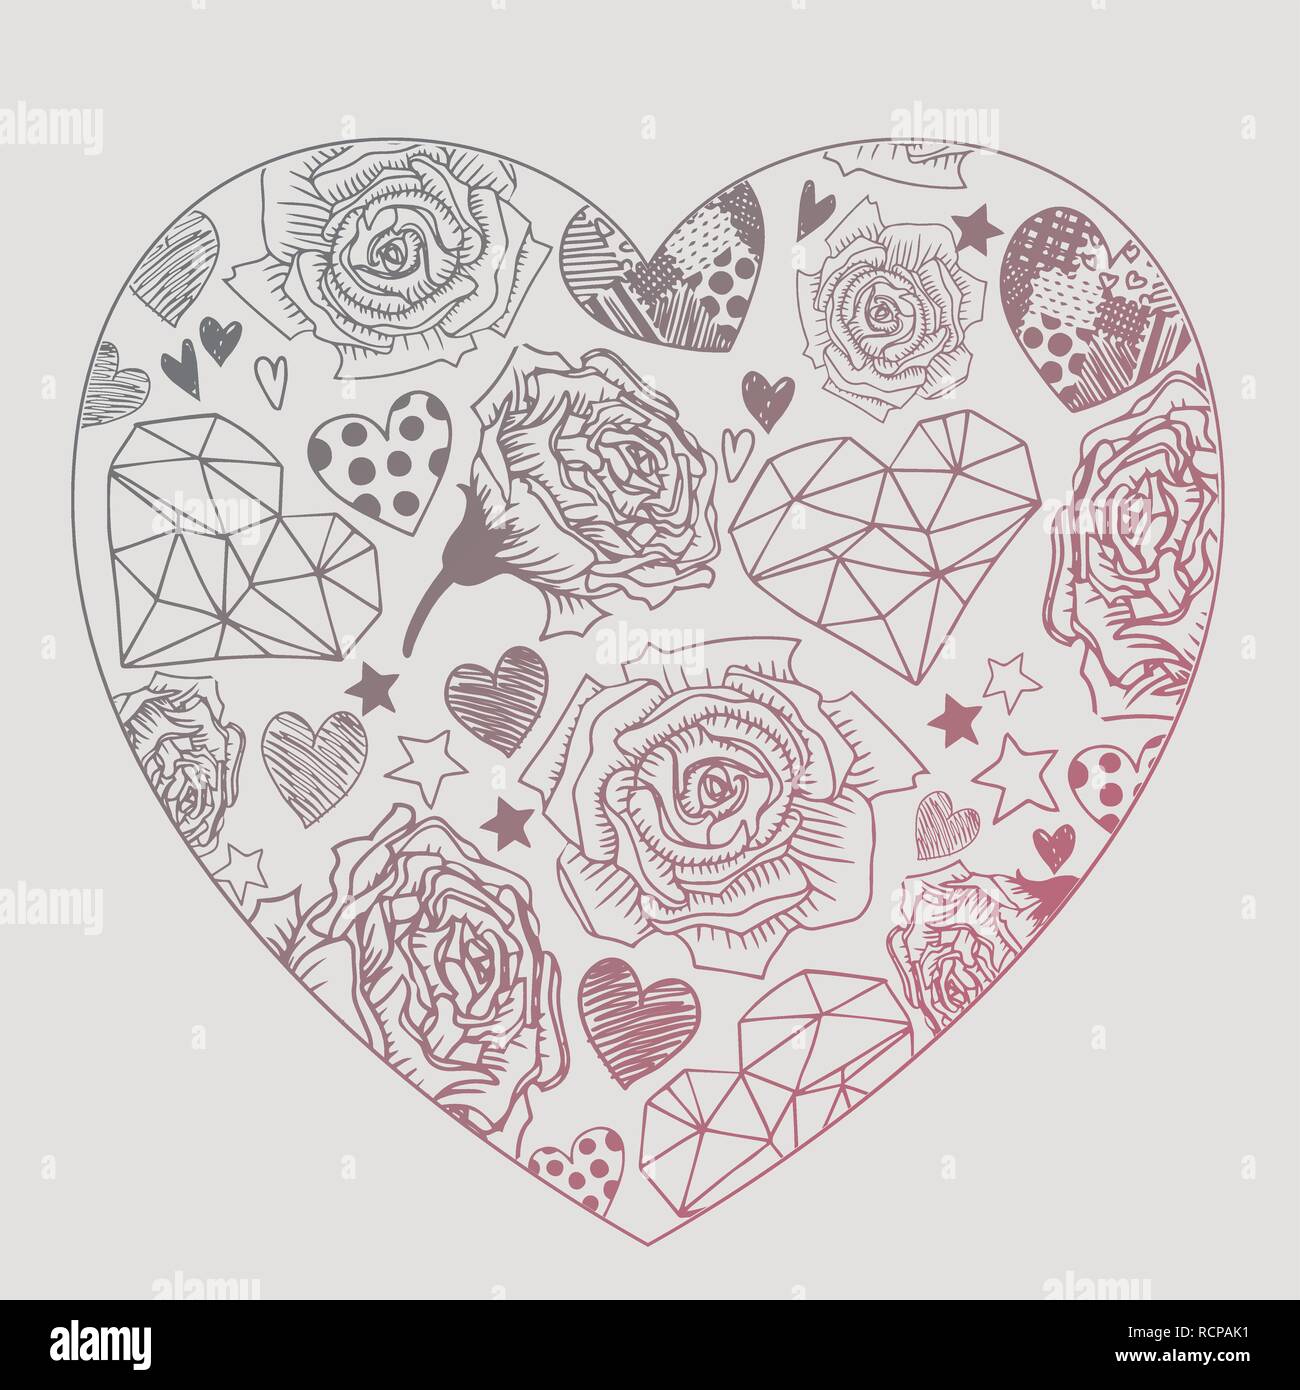 Valentines day doodles illustrations full vector background Stock Vector